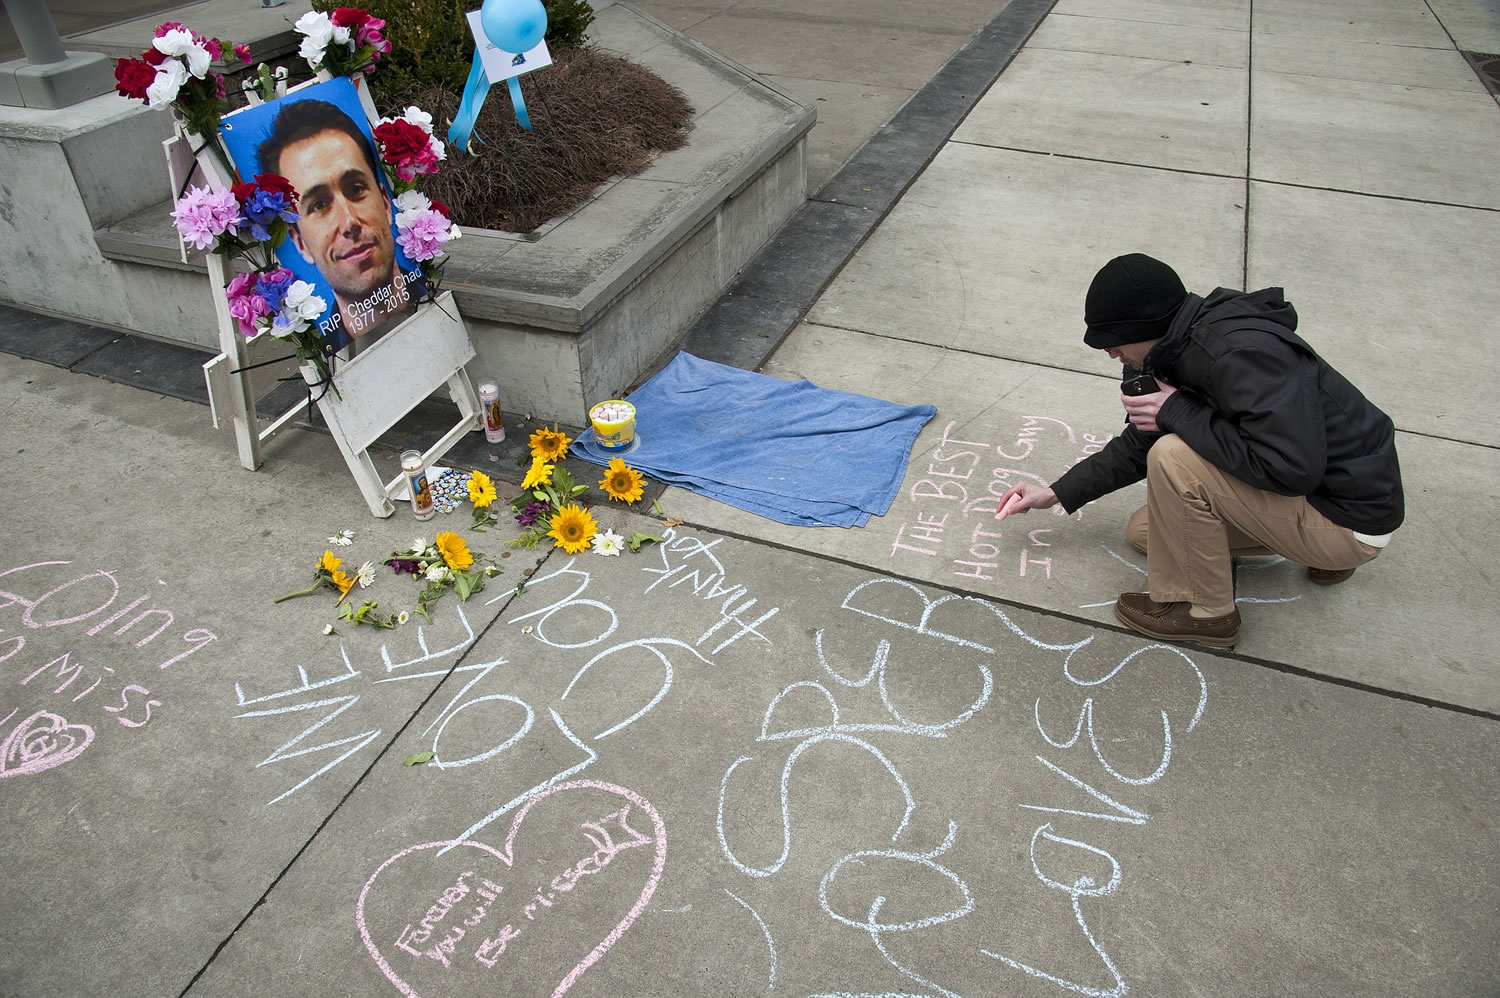 Casey Devine writes a chalk message Wednesday at a sidewalk memorial to hot dog vendor Chad Rattray in Spokane. Rattray had been a fixture on the corner for the past 13 years.